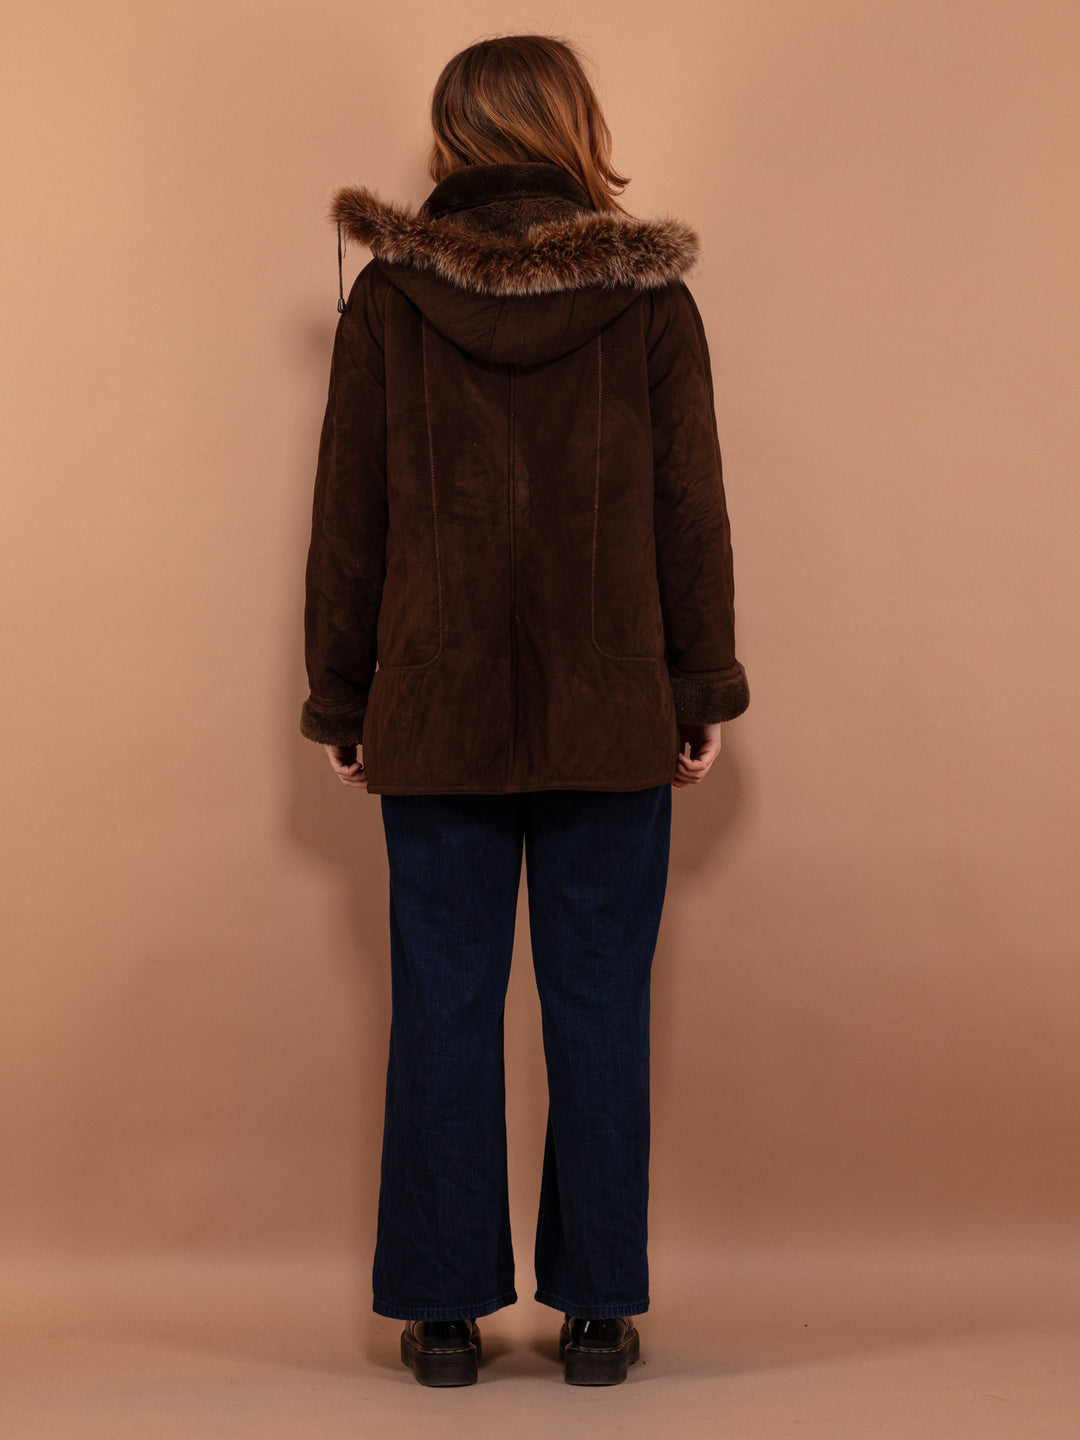 Faux Sheepskin Coat 90s, Size L Brown Faux Shearling Coat, Sherpa Trim Afghan Coat,  Cruelty Free Coat, Sustainable Vintage Clothing